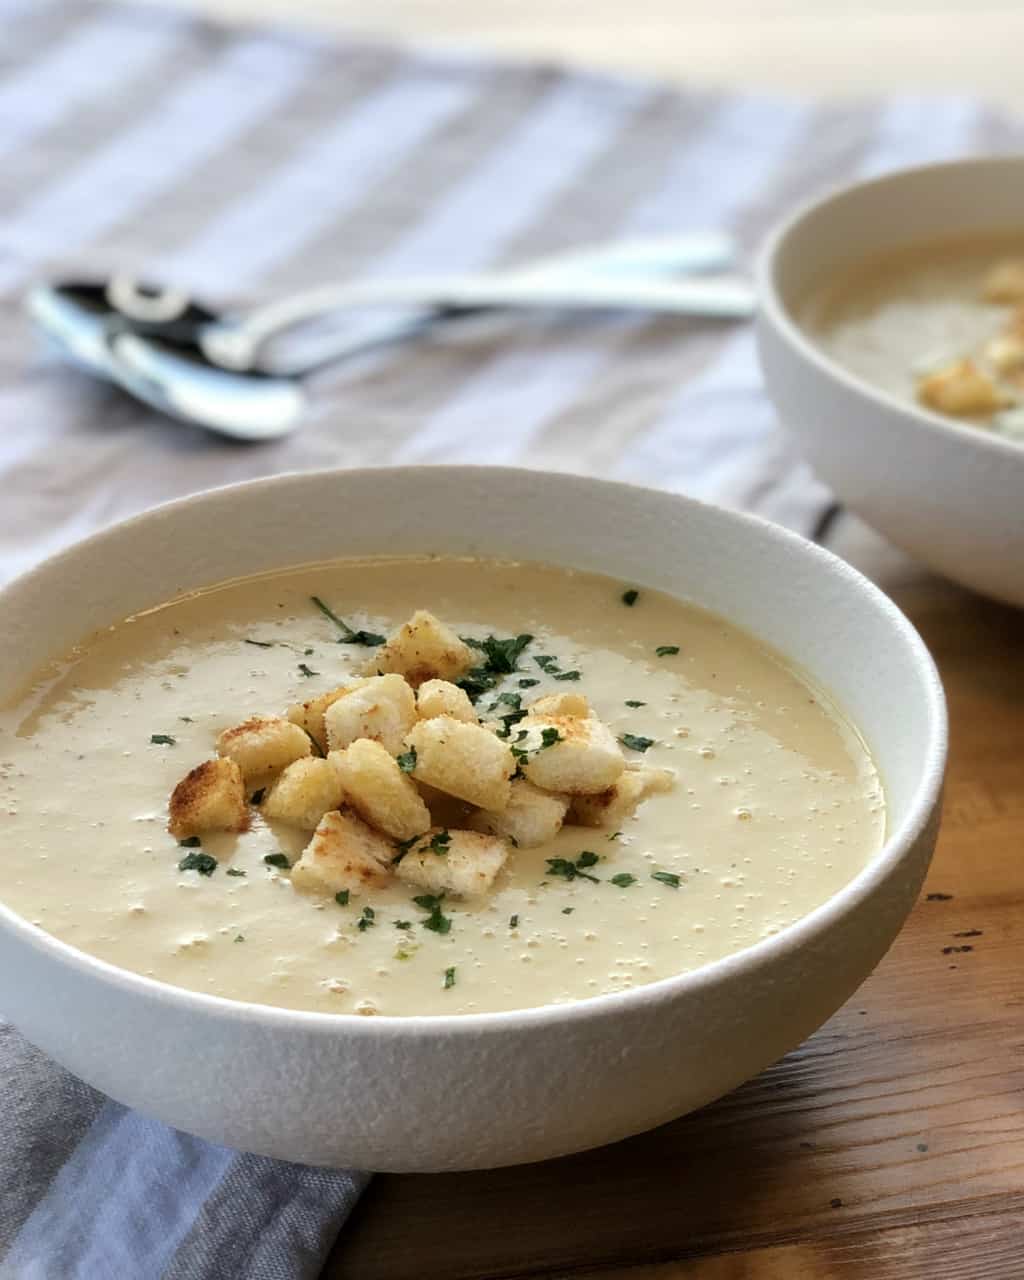 Bowl of Potato and Leak Soup with croutons and parsley